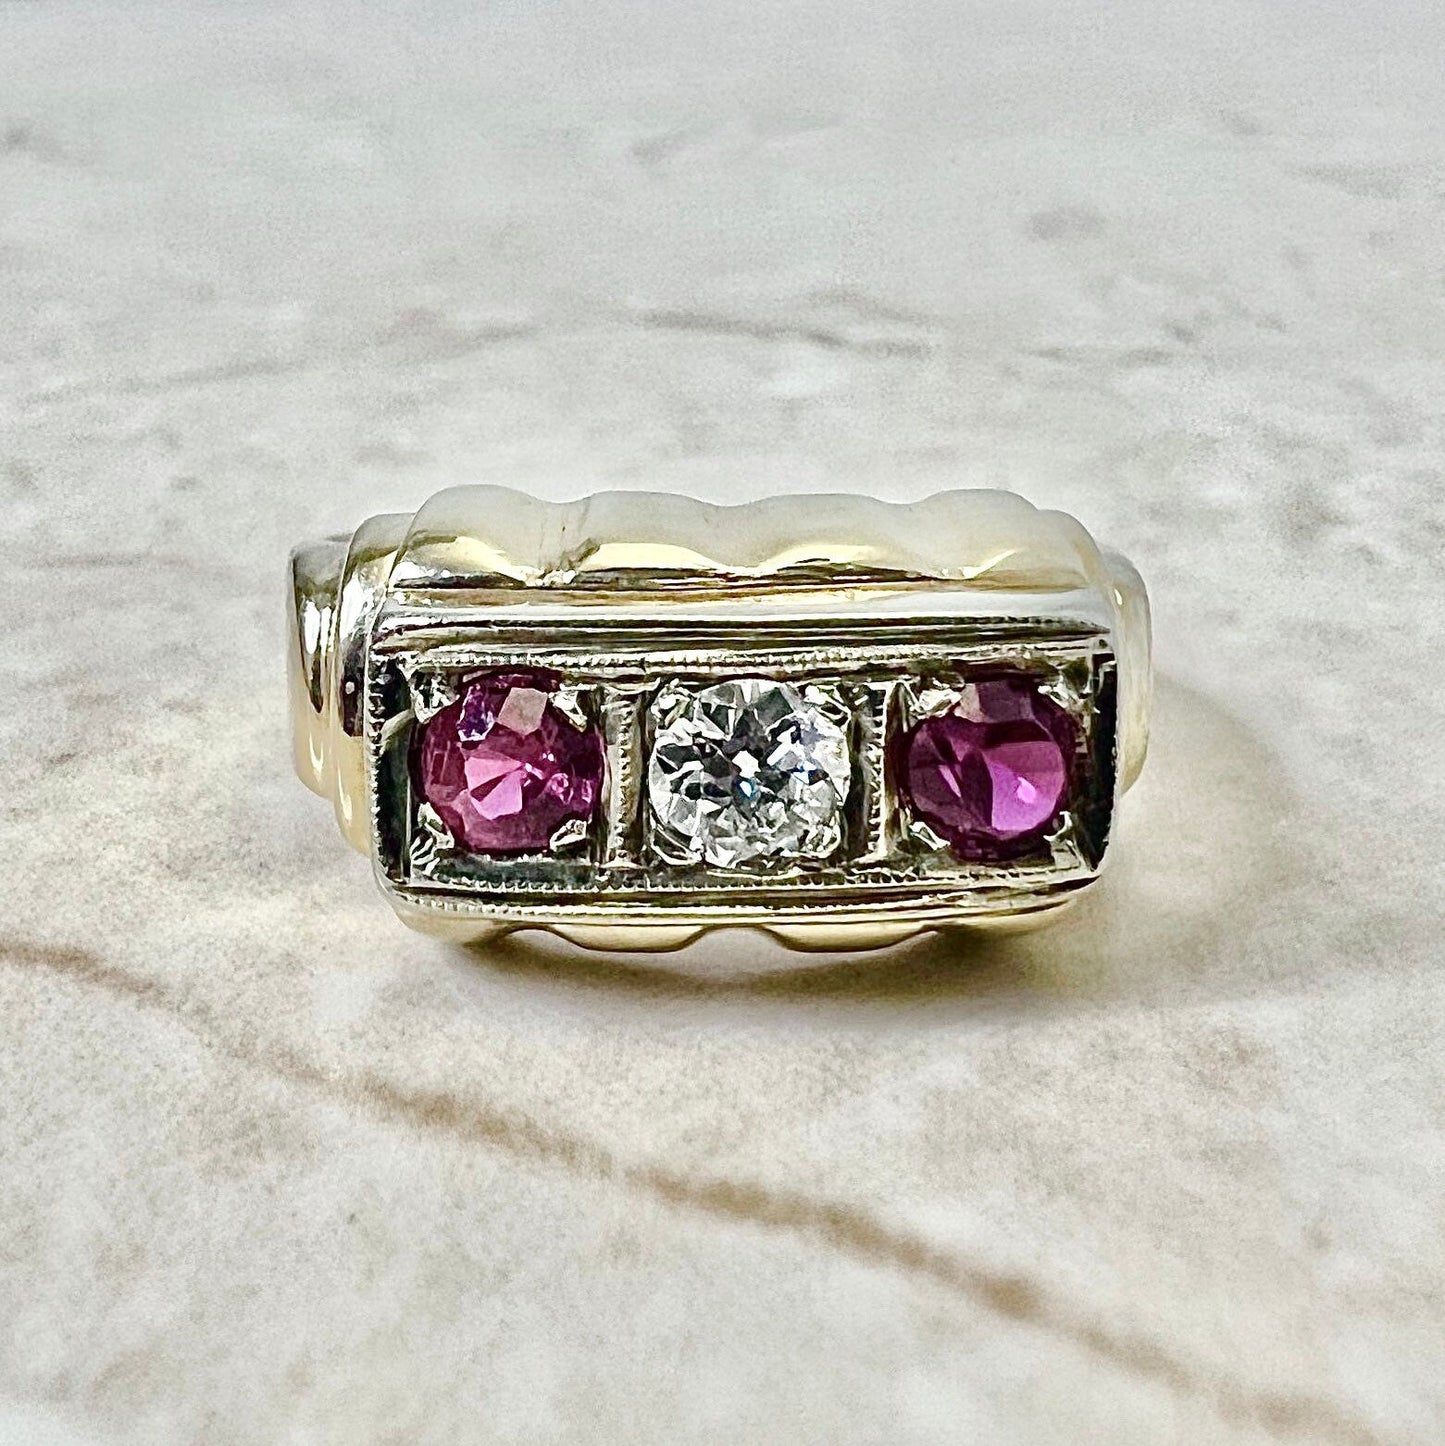 Fine Vintage Retro 14K Diamond & Synthetic Ruby Cocktail Ring - Gold Retro Ring - Circa 1940 - Valentine’s Day Gift For Her - Jewelry Sale